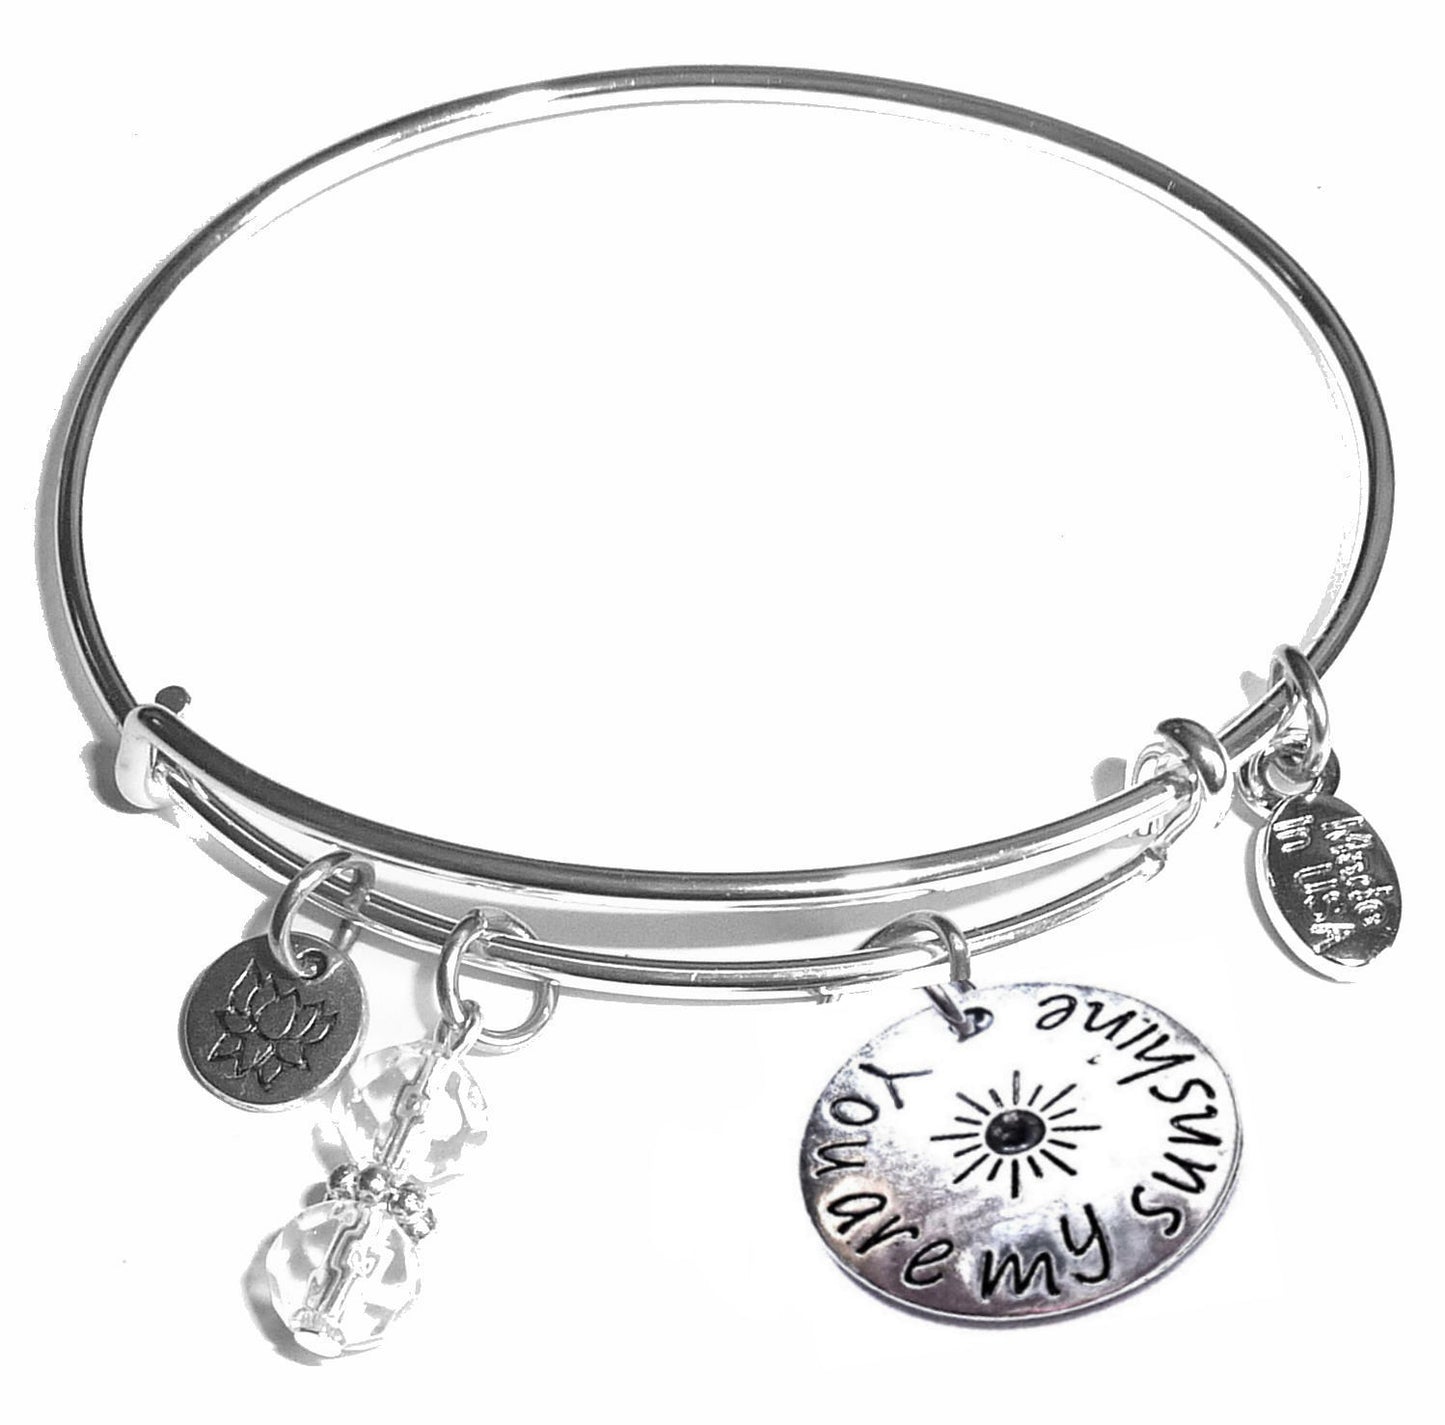 You are my Sunshine - Message Bangle Bracelet - Expandable Wire Bracelet– Comes in a gift box